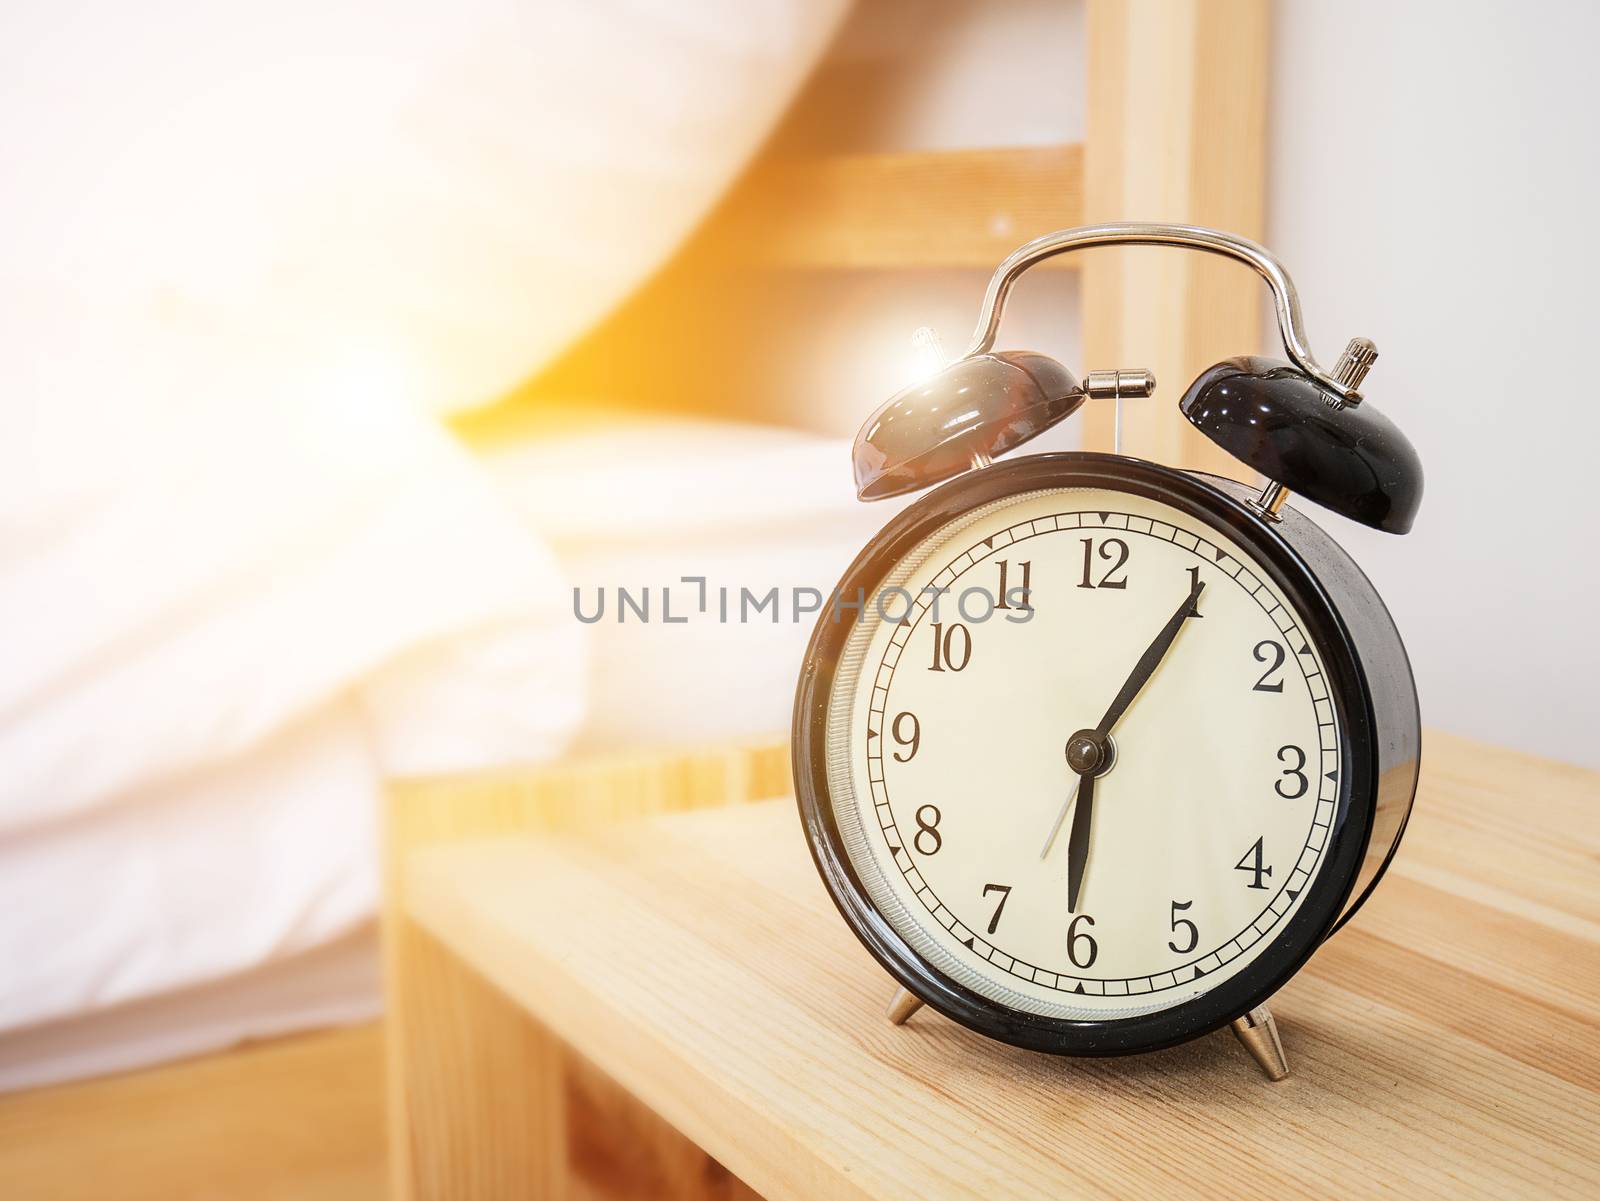 Alarm clock , wake-up time concept : Retro alarm clock with five minutes past six o'clock in the morning on wooden bed side table with white bed sheet and morning sunlight background